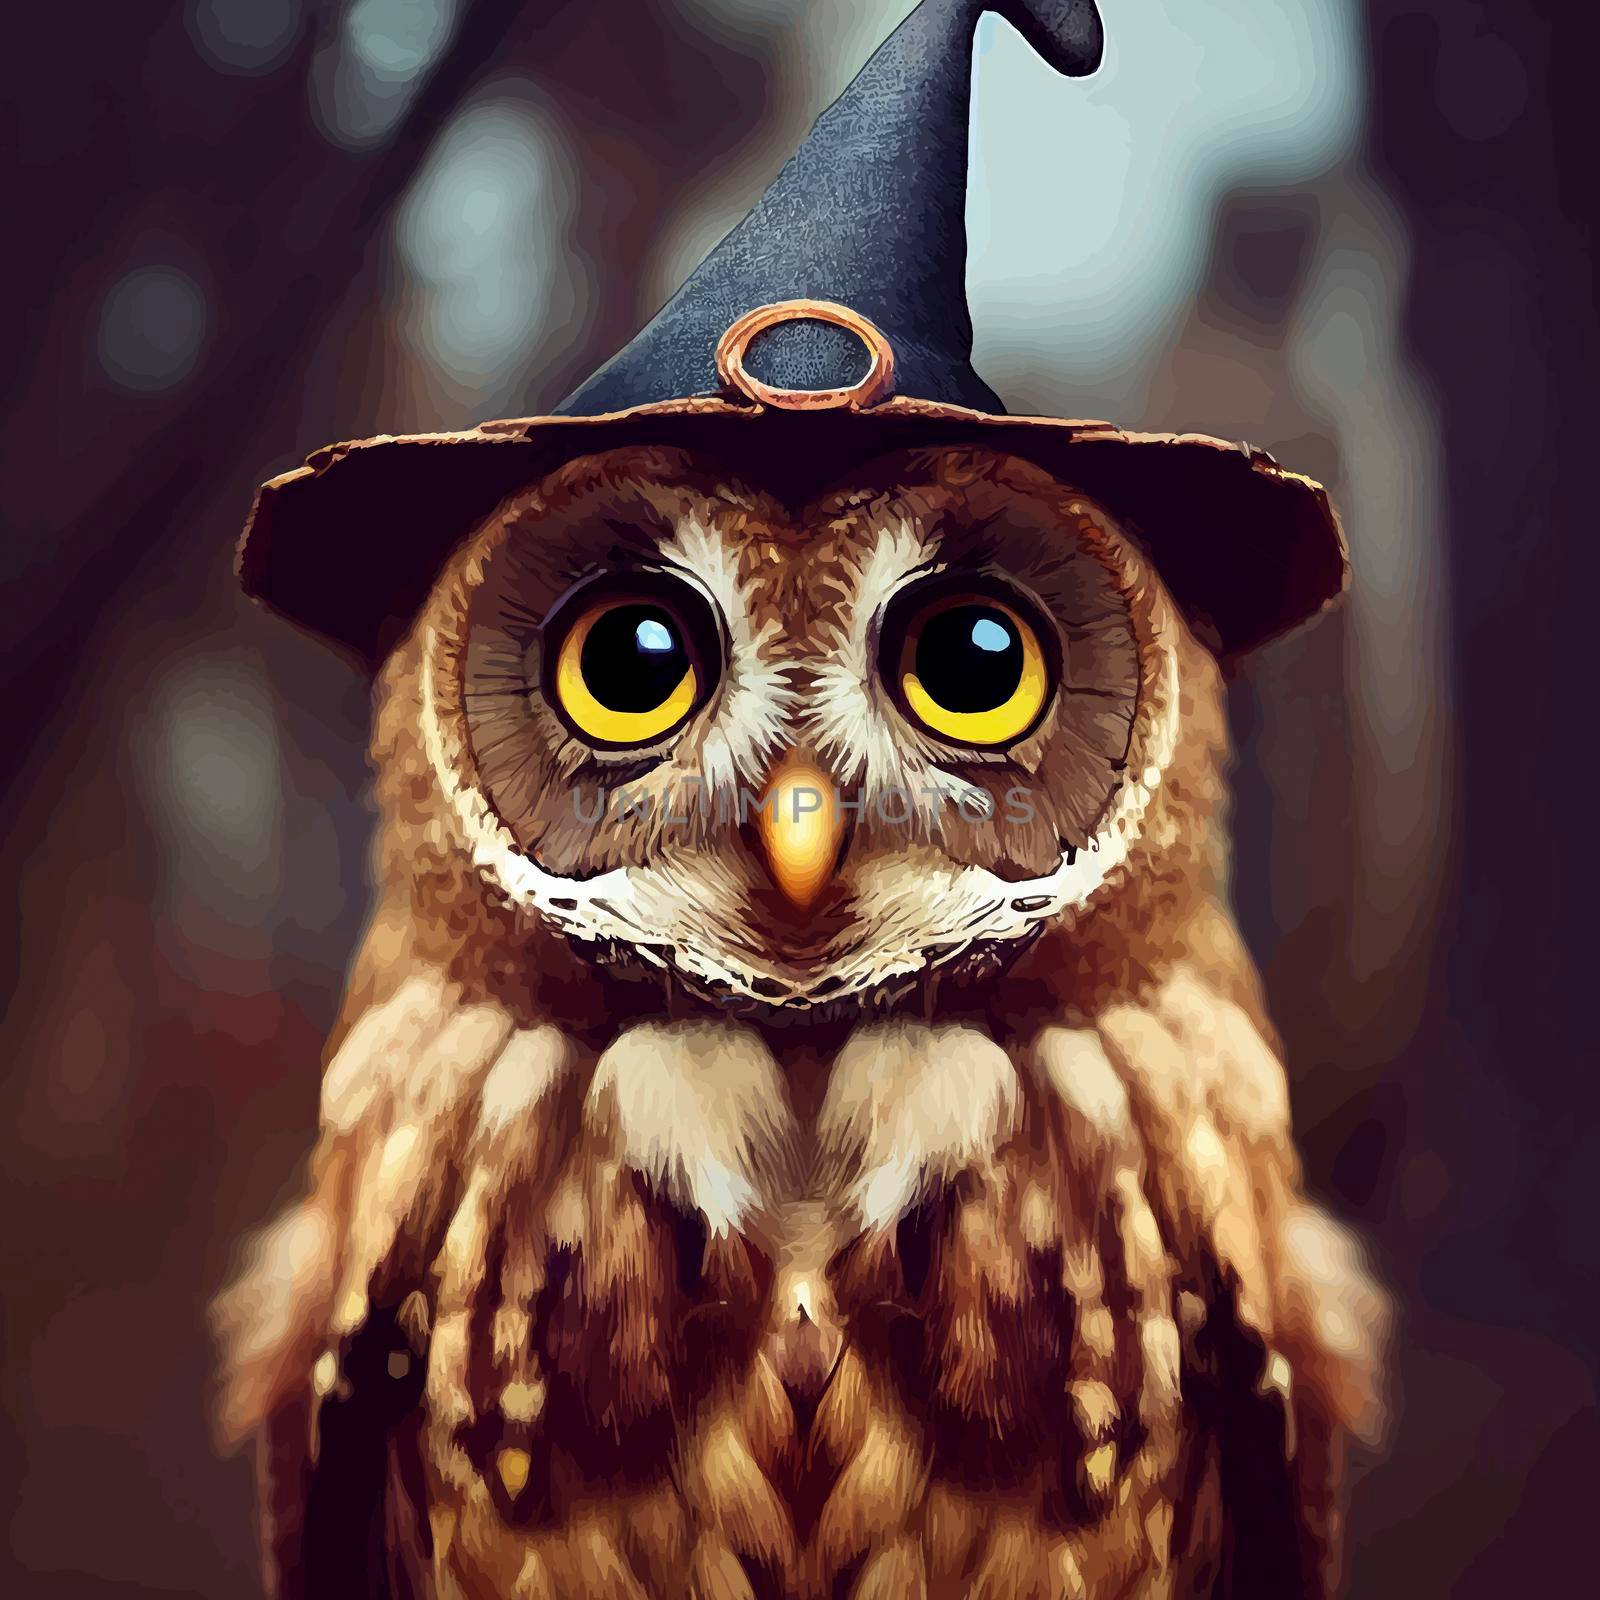 animated illustration of a cute owl with hat, animated owl portrait.